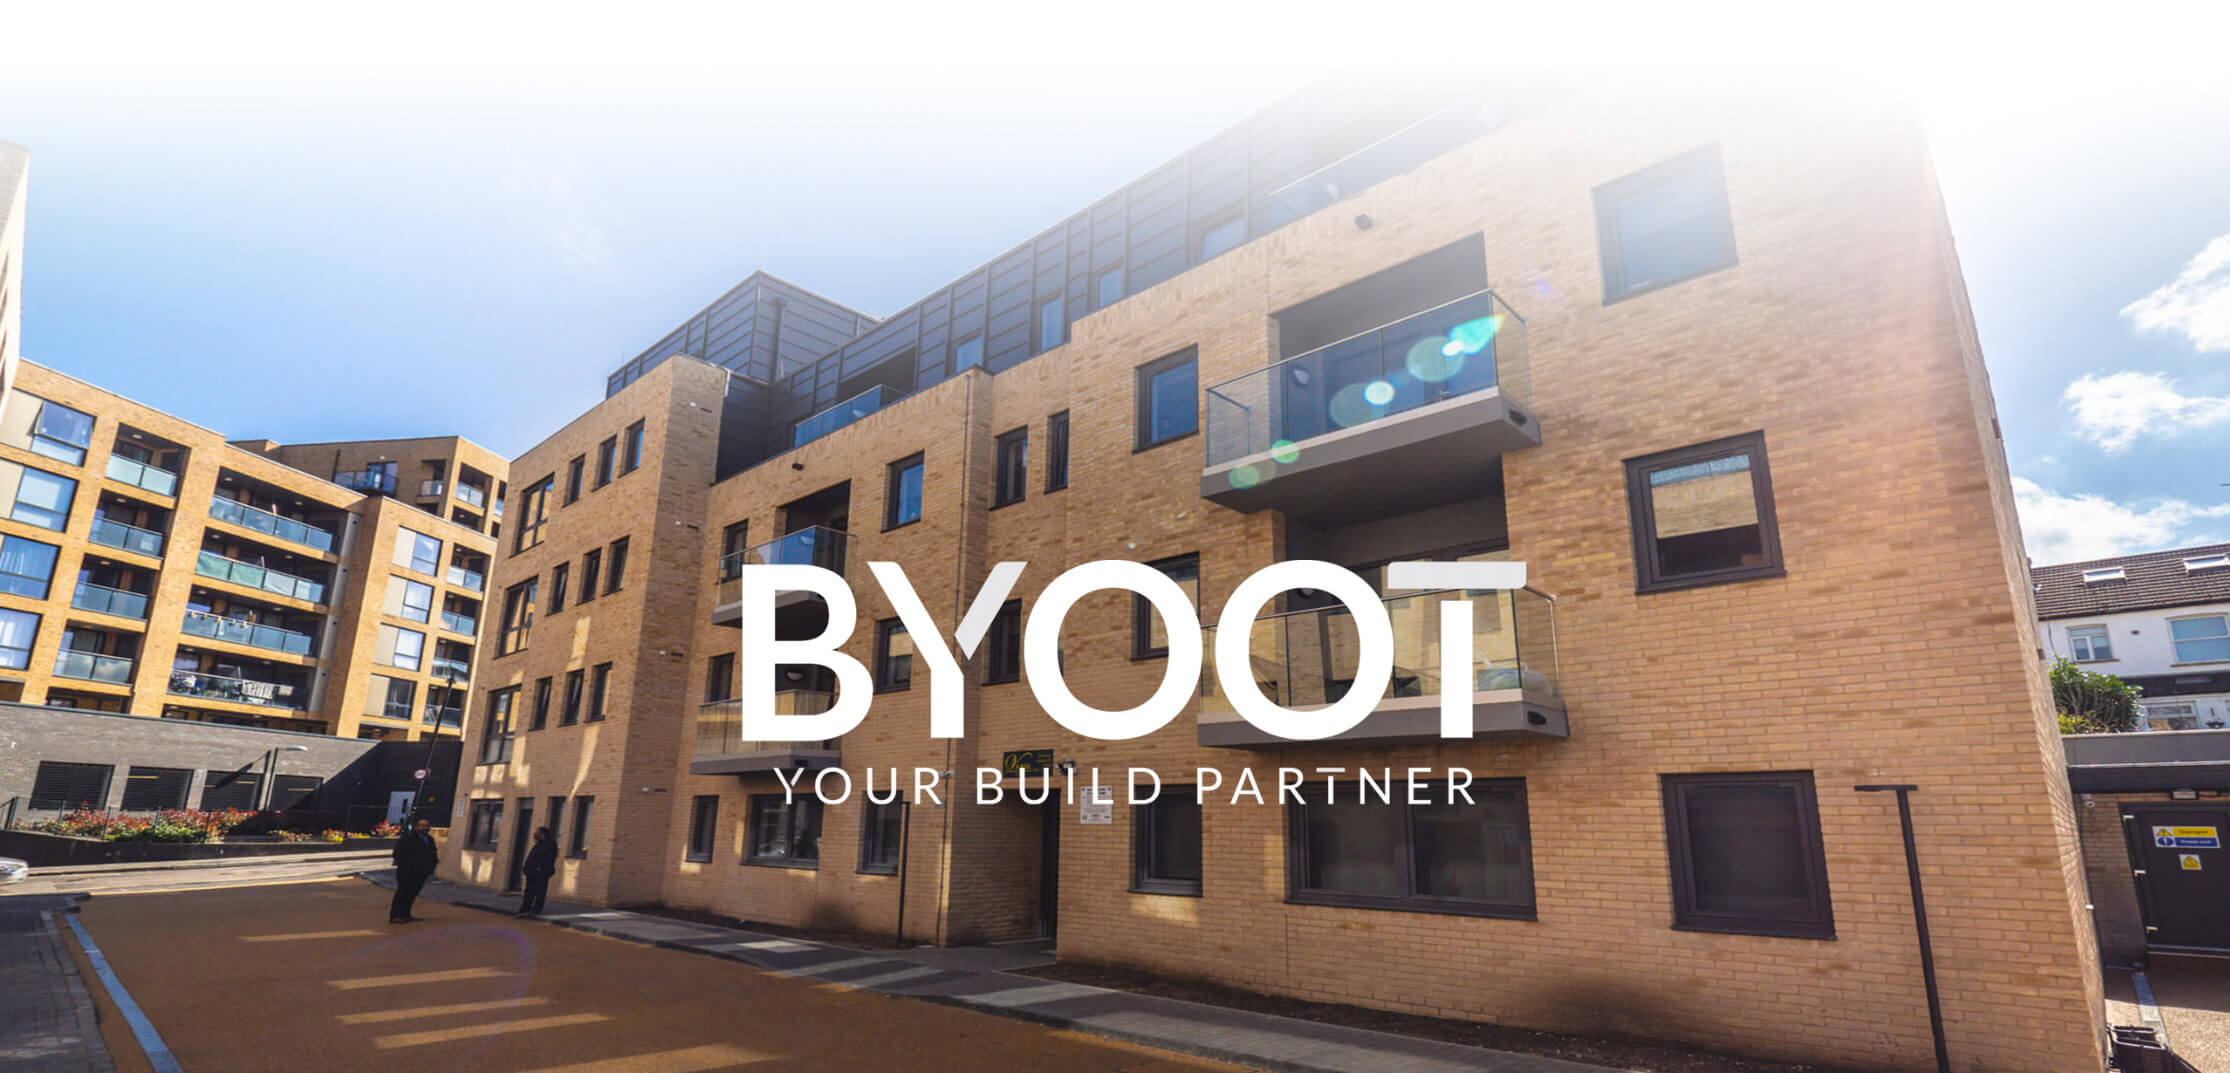 Byoot build and design company header